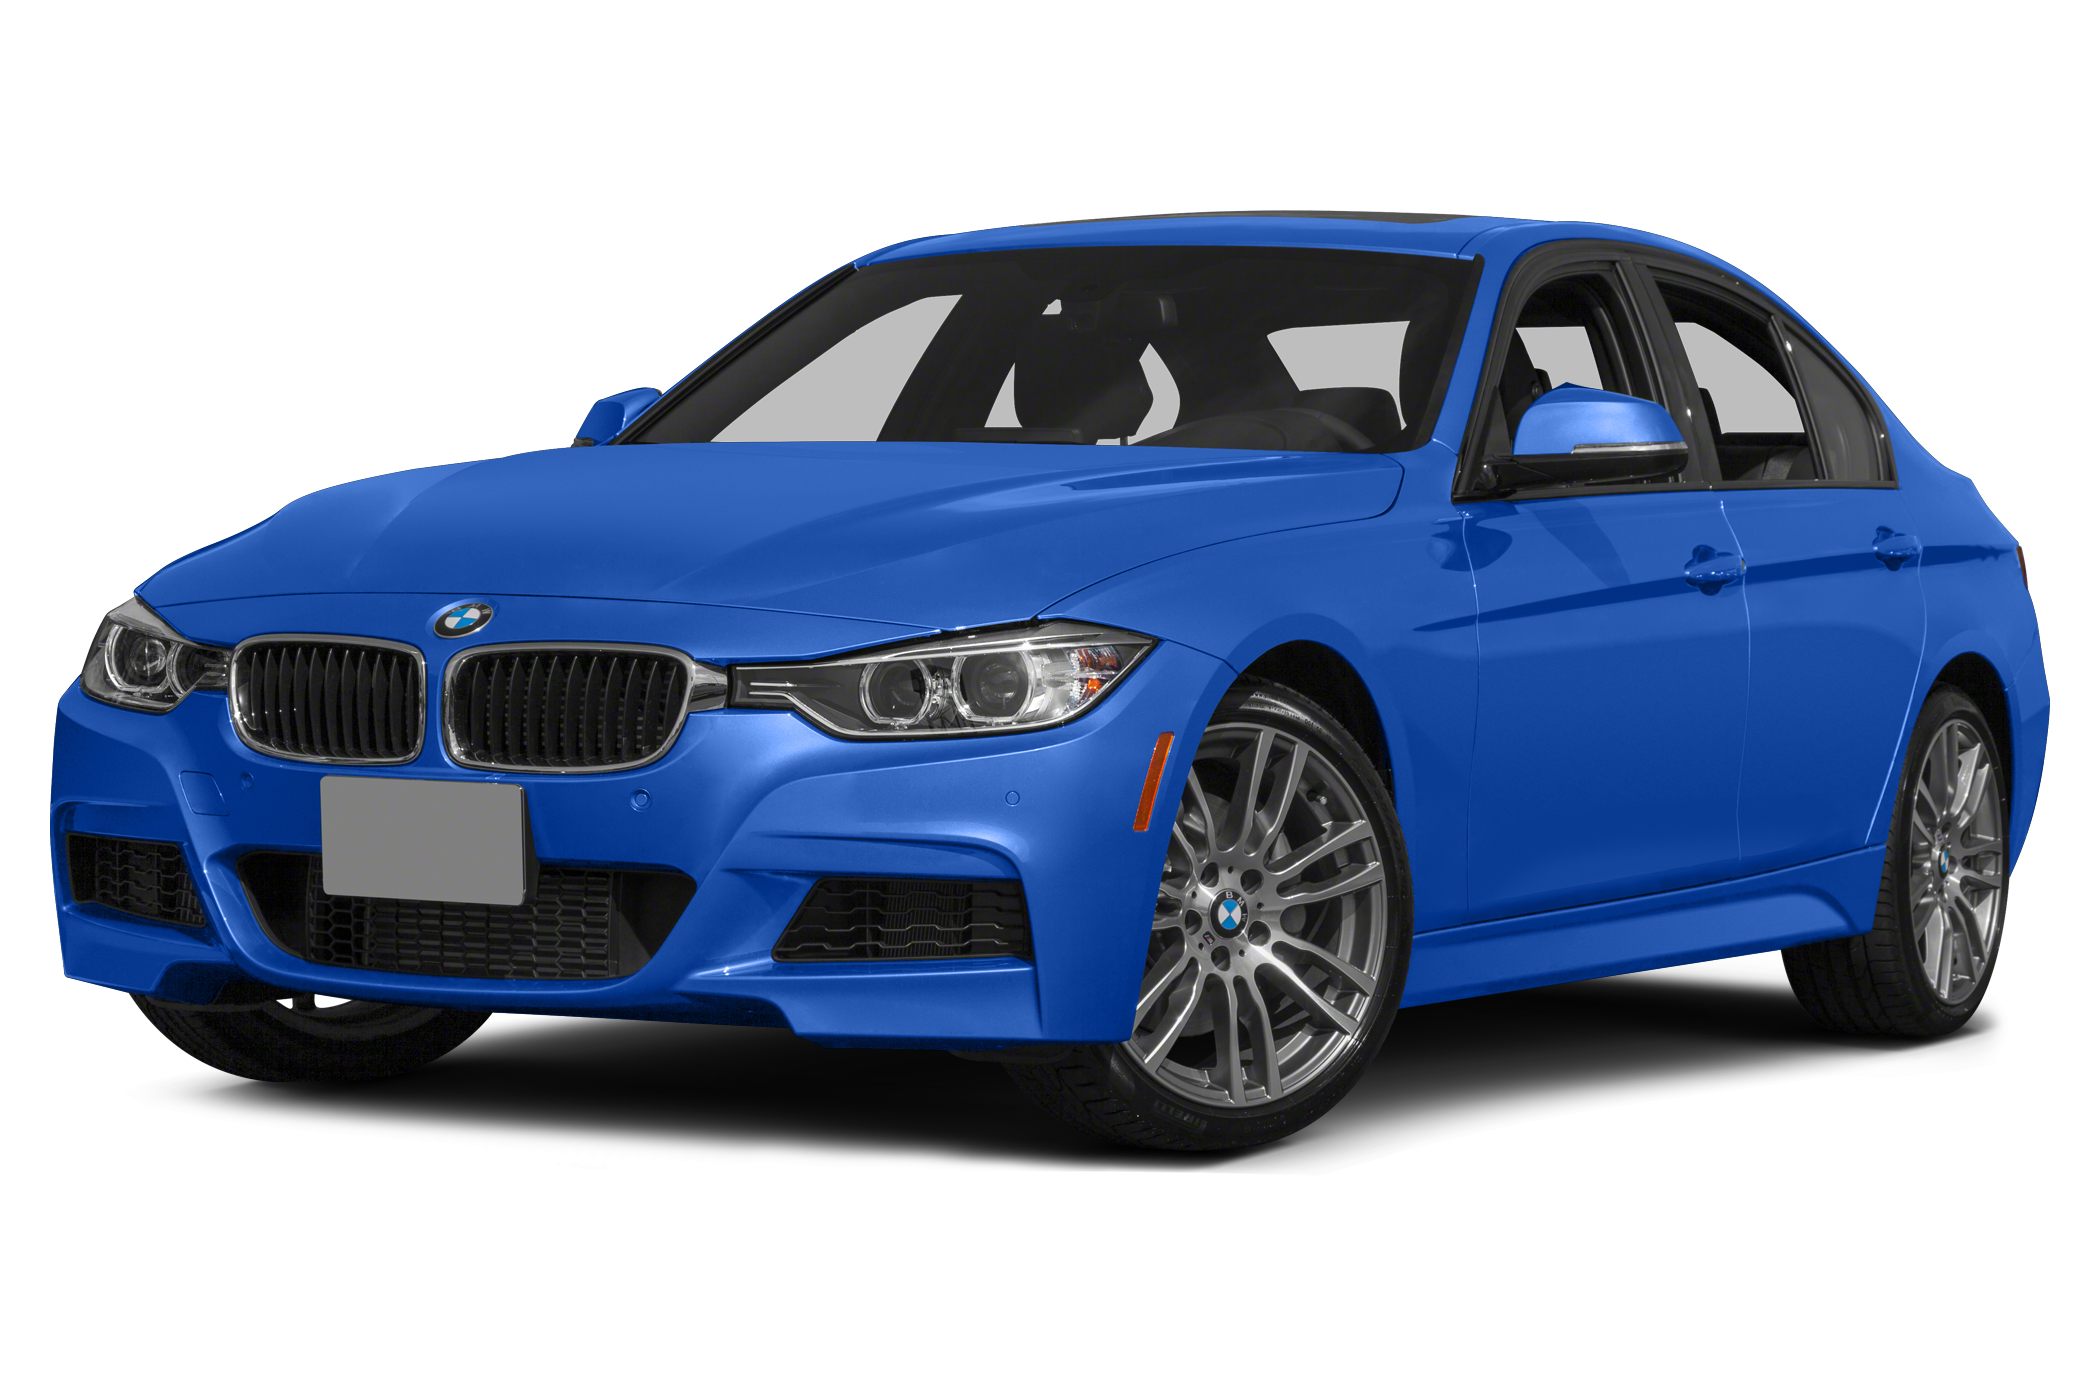  BMW 335I-Xdrive oem parts and accessories on sale